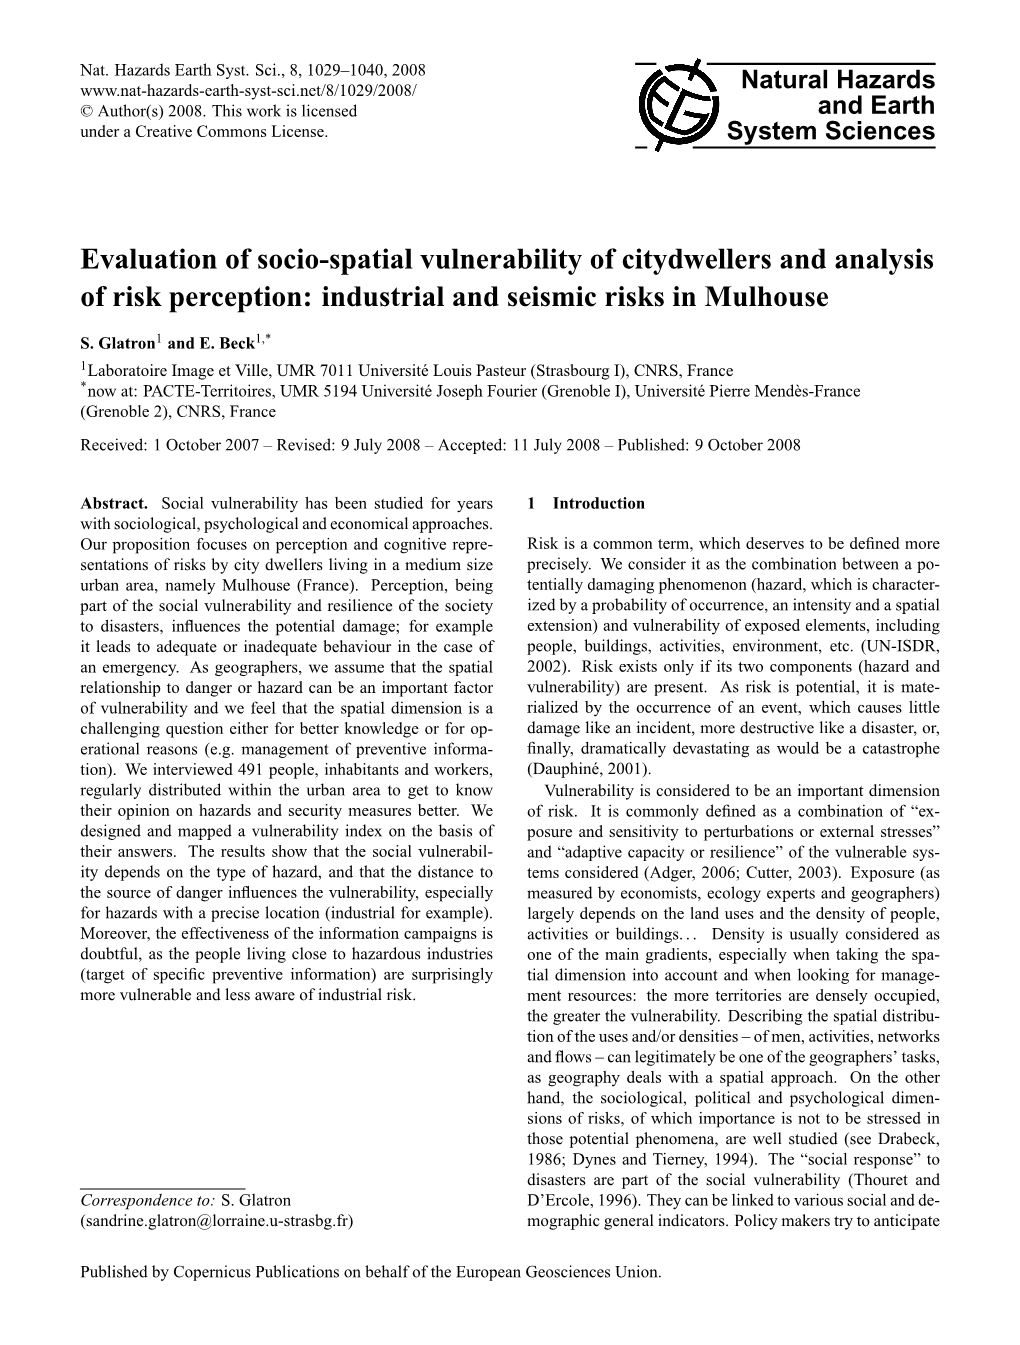 Evaluation of Socio-Spatial Vulnerability of Citydwellers and Analysis of Risk Perception: Industrial and Seismic Risks in Mulhouse